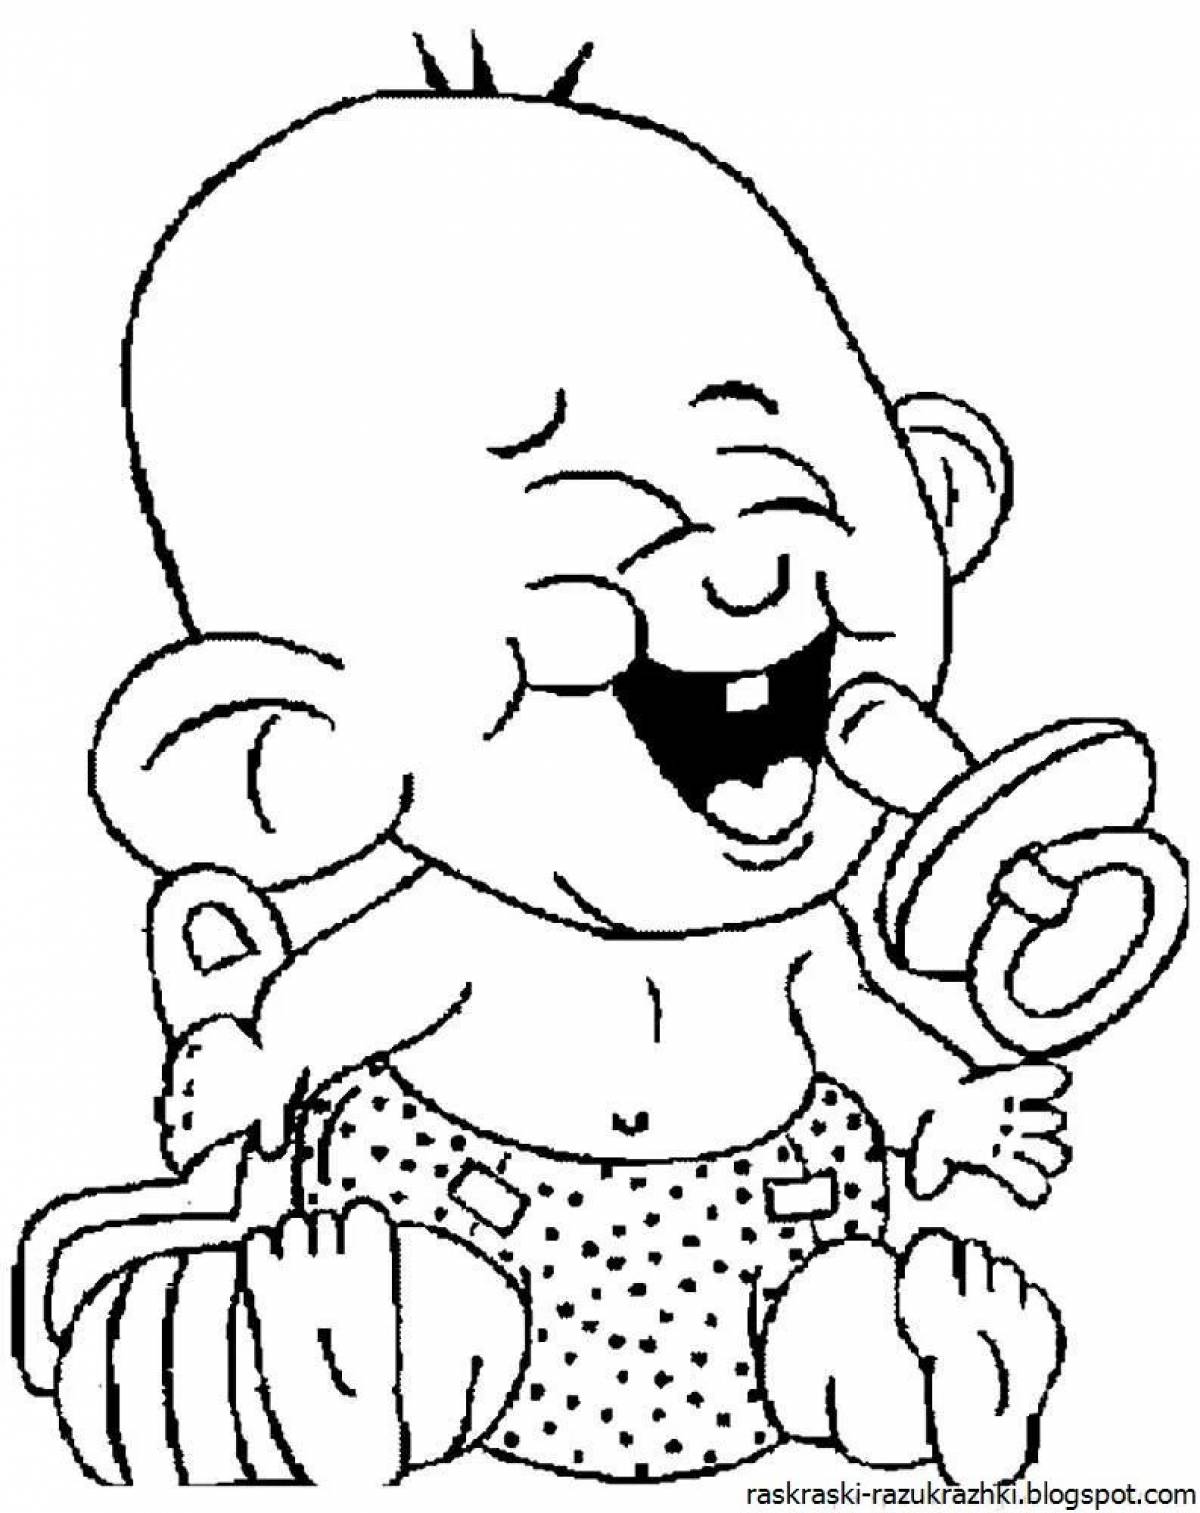 Exquisite coloring pages for dolls